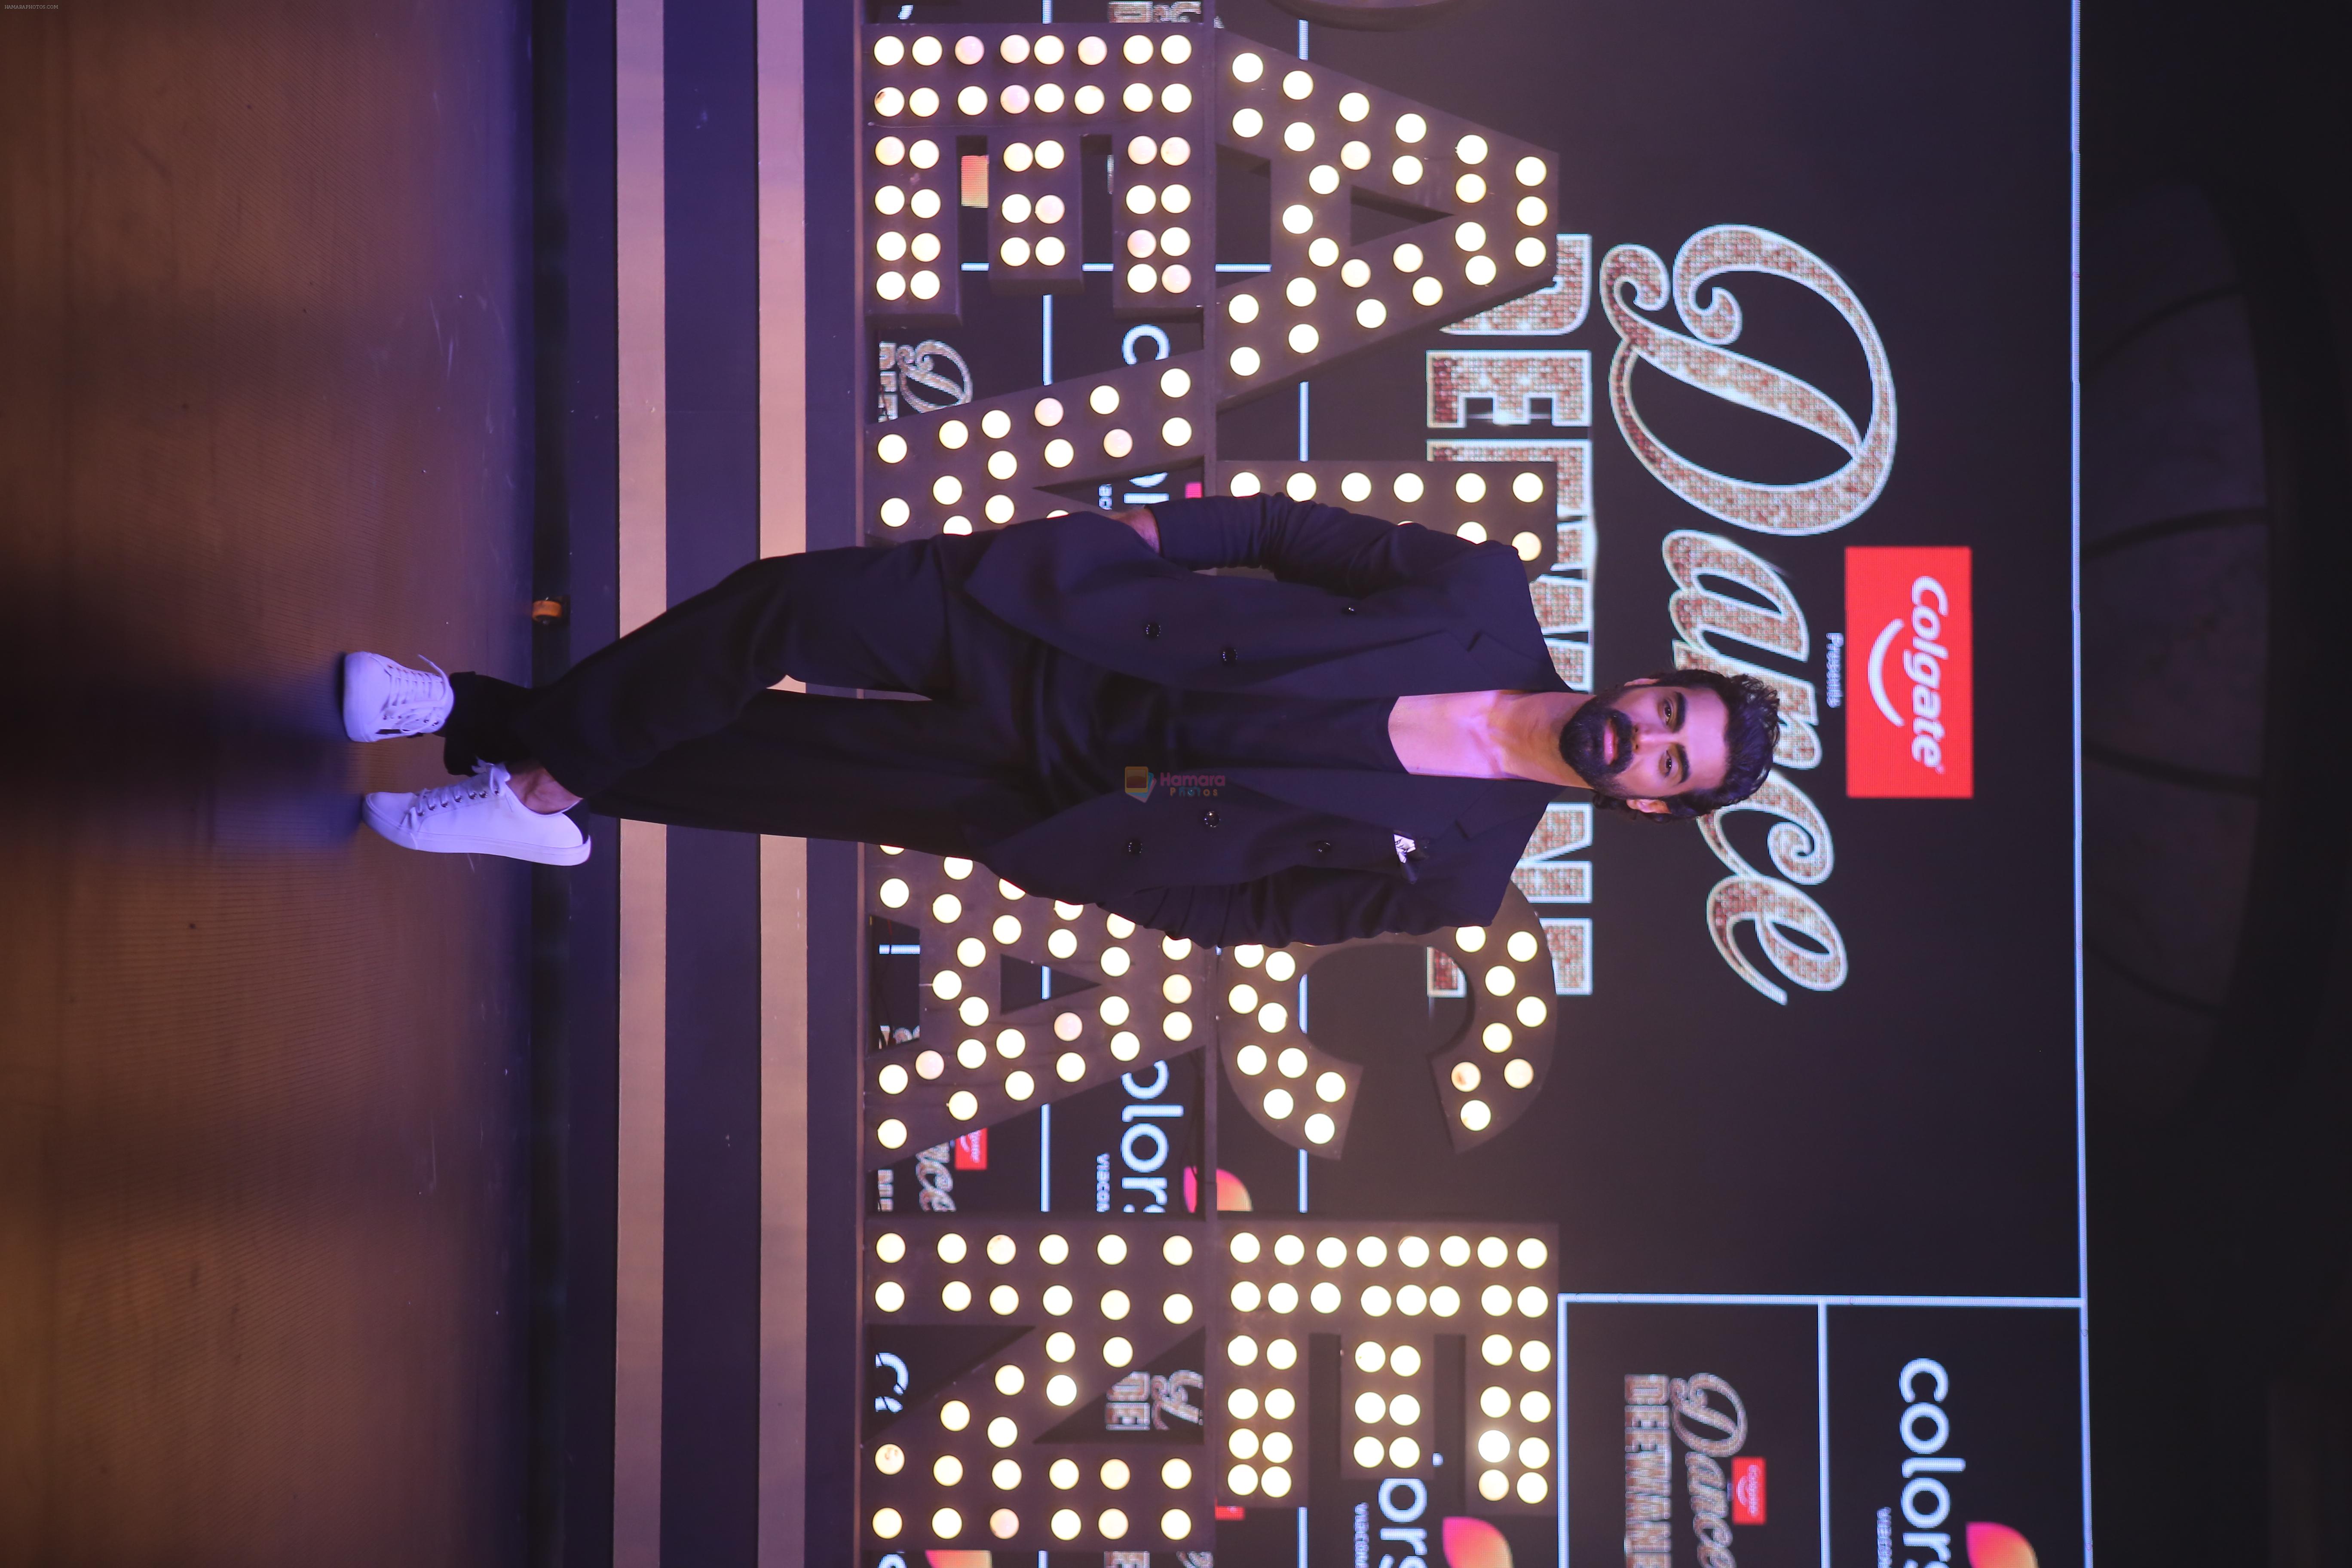 Tushar Kalia at the launch of colors show Dance Deewane at jw marriott juhu on 26th May 2019